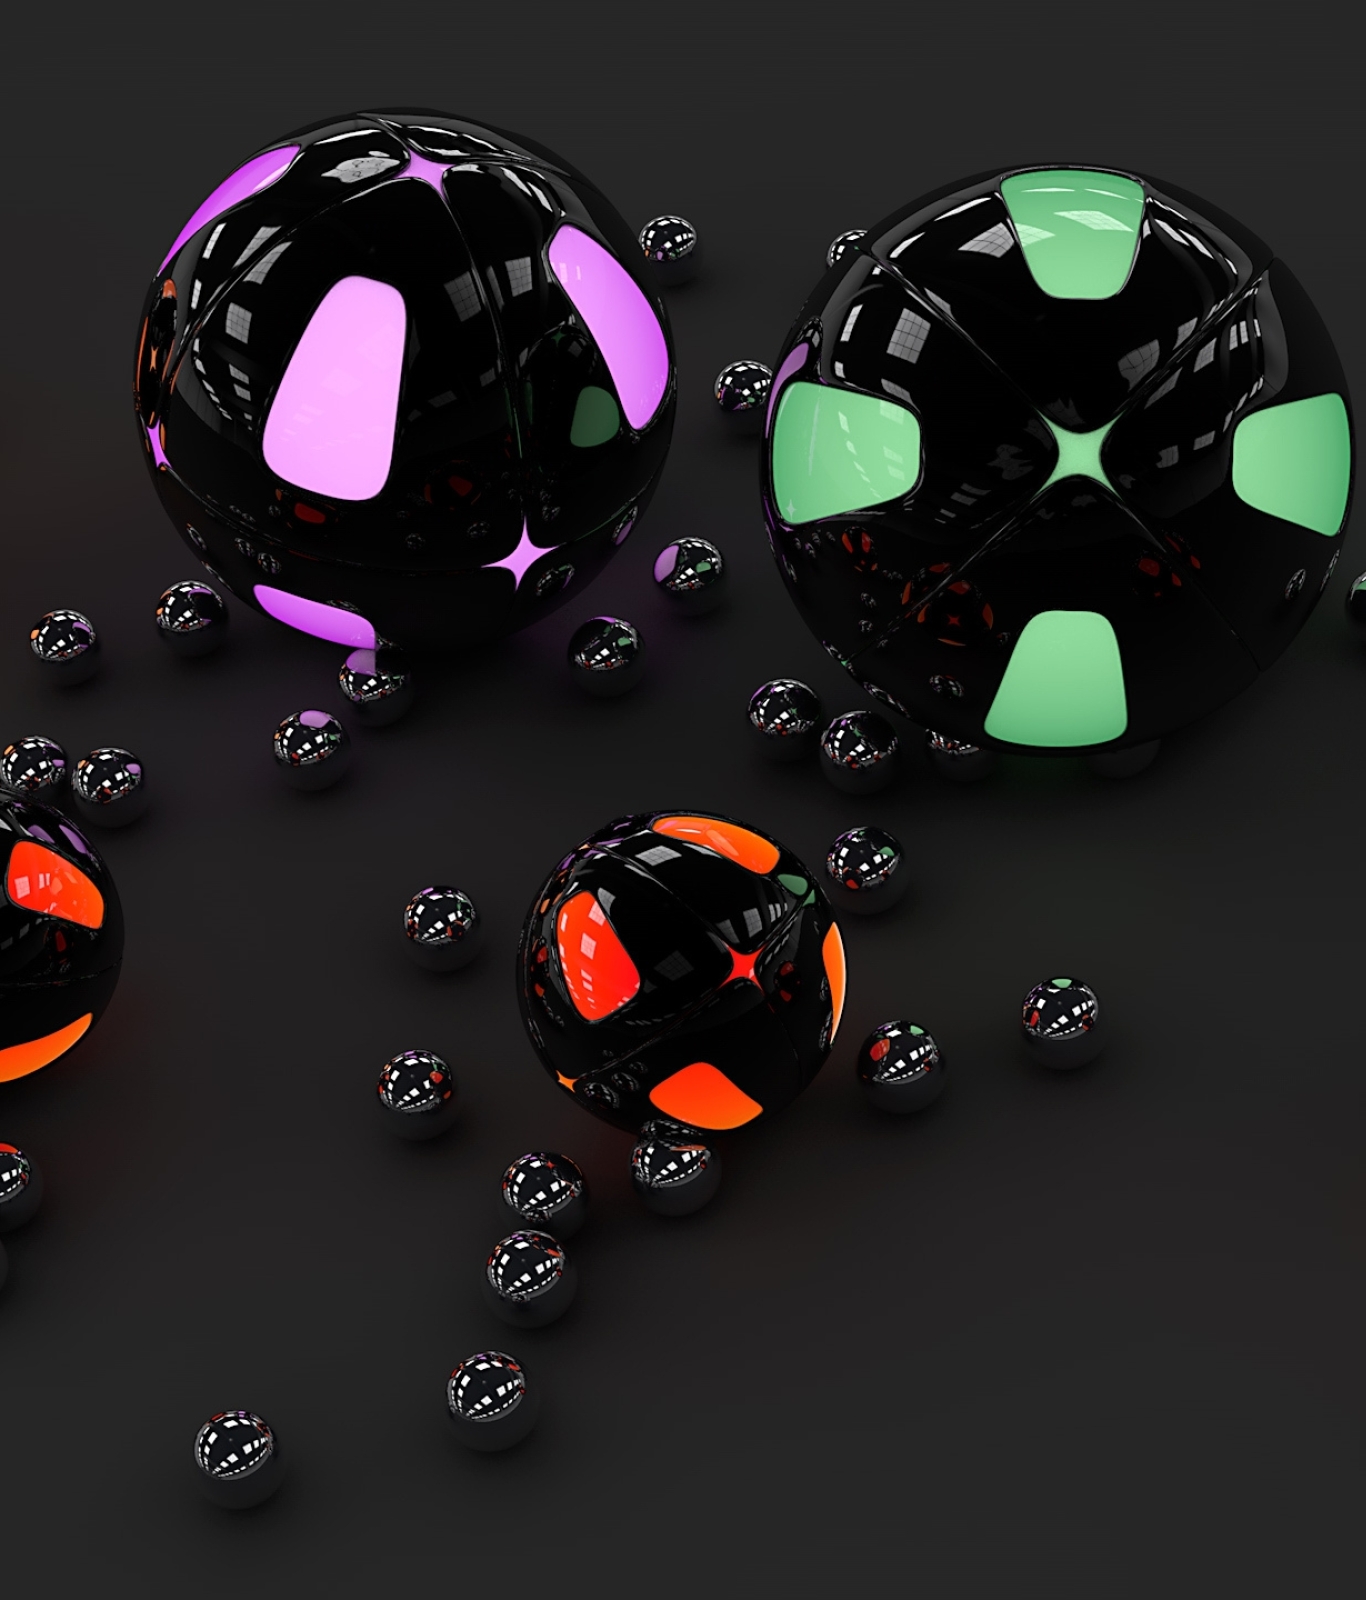 1366x1600 sphere, spheres, surface 1366x1600 Resolution Wallpaper, HD ...